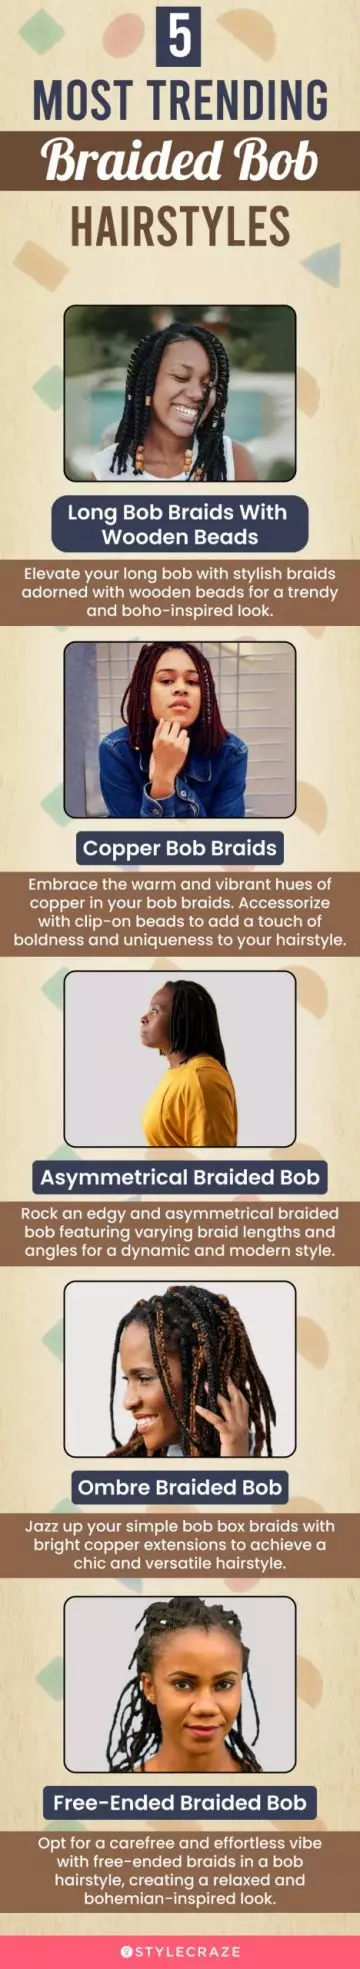 5 most trending braided bob hairstyles (infographic)